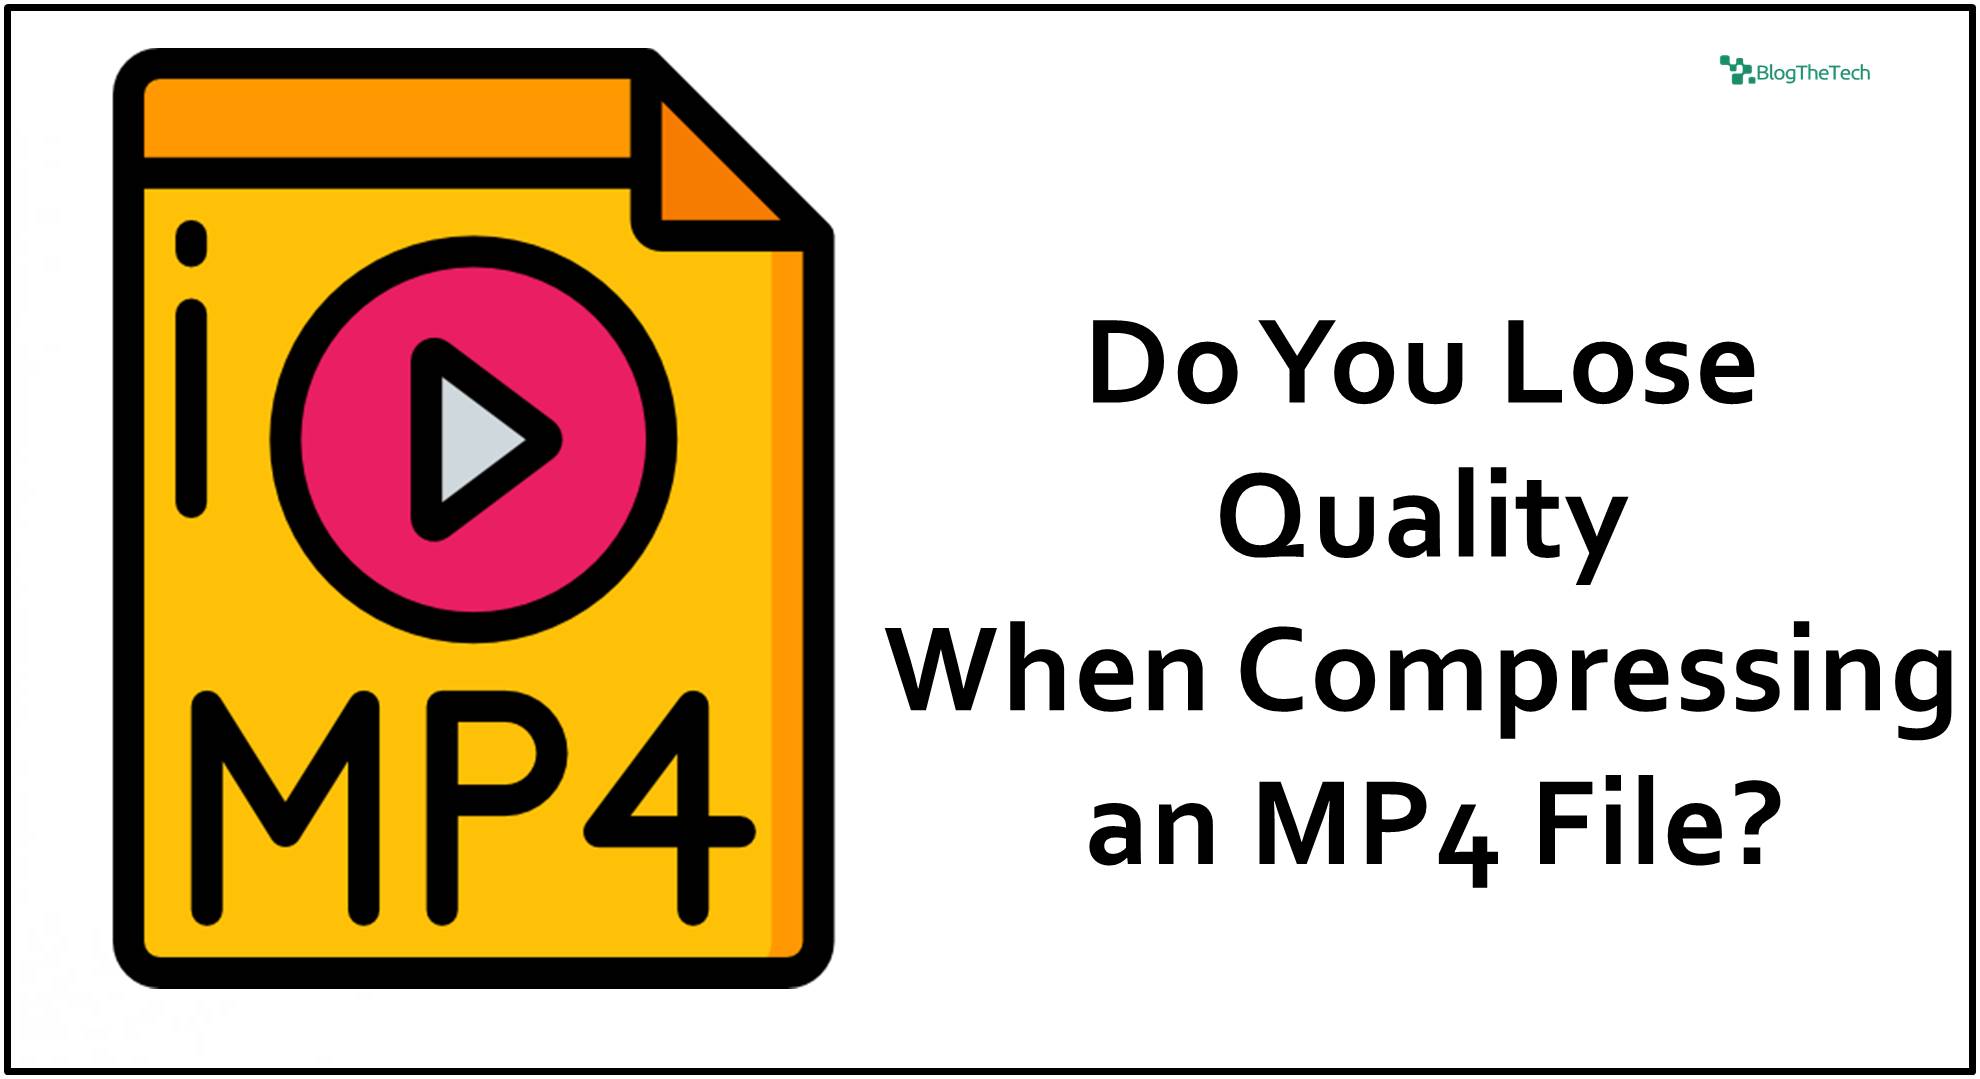 Do You Lose Quality When Compressing an MP4 File?